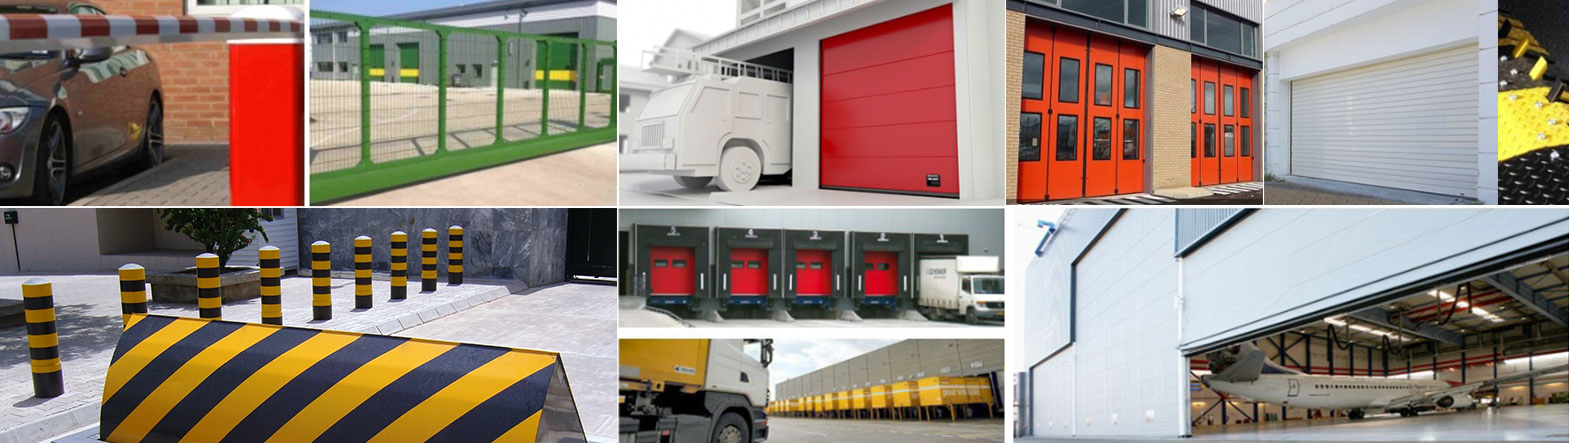 Rumaillah Group gate barriers and warehouse equipement